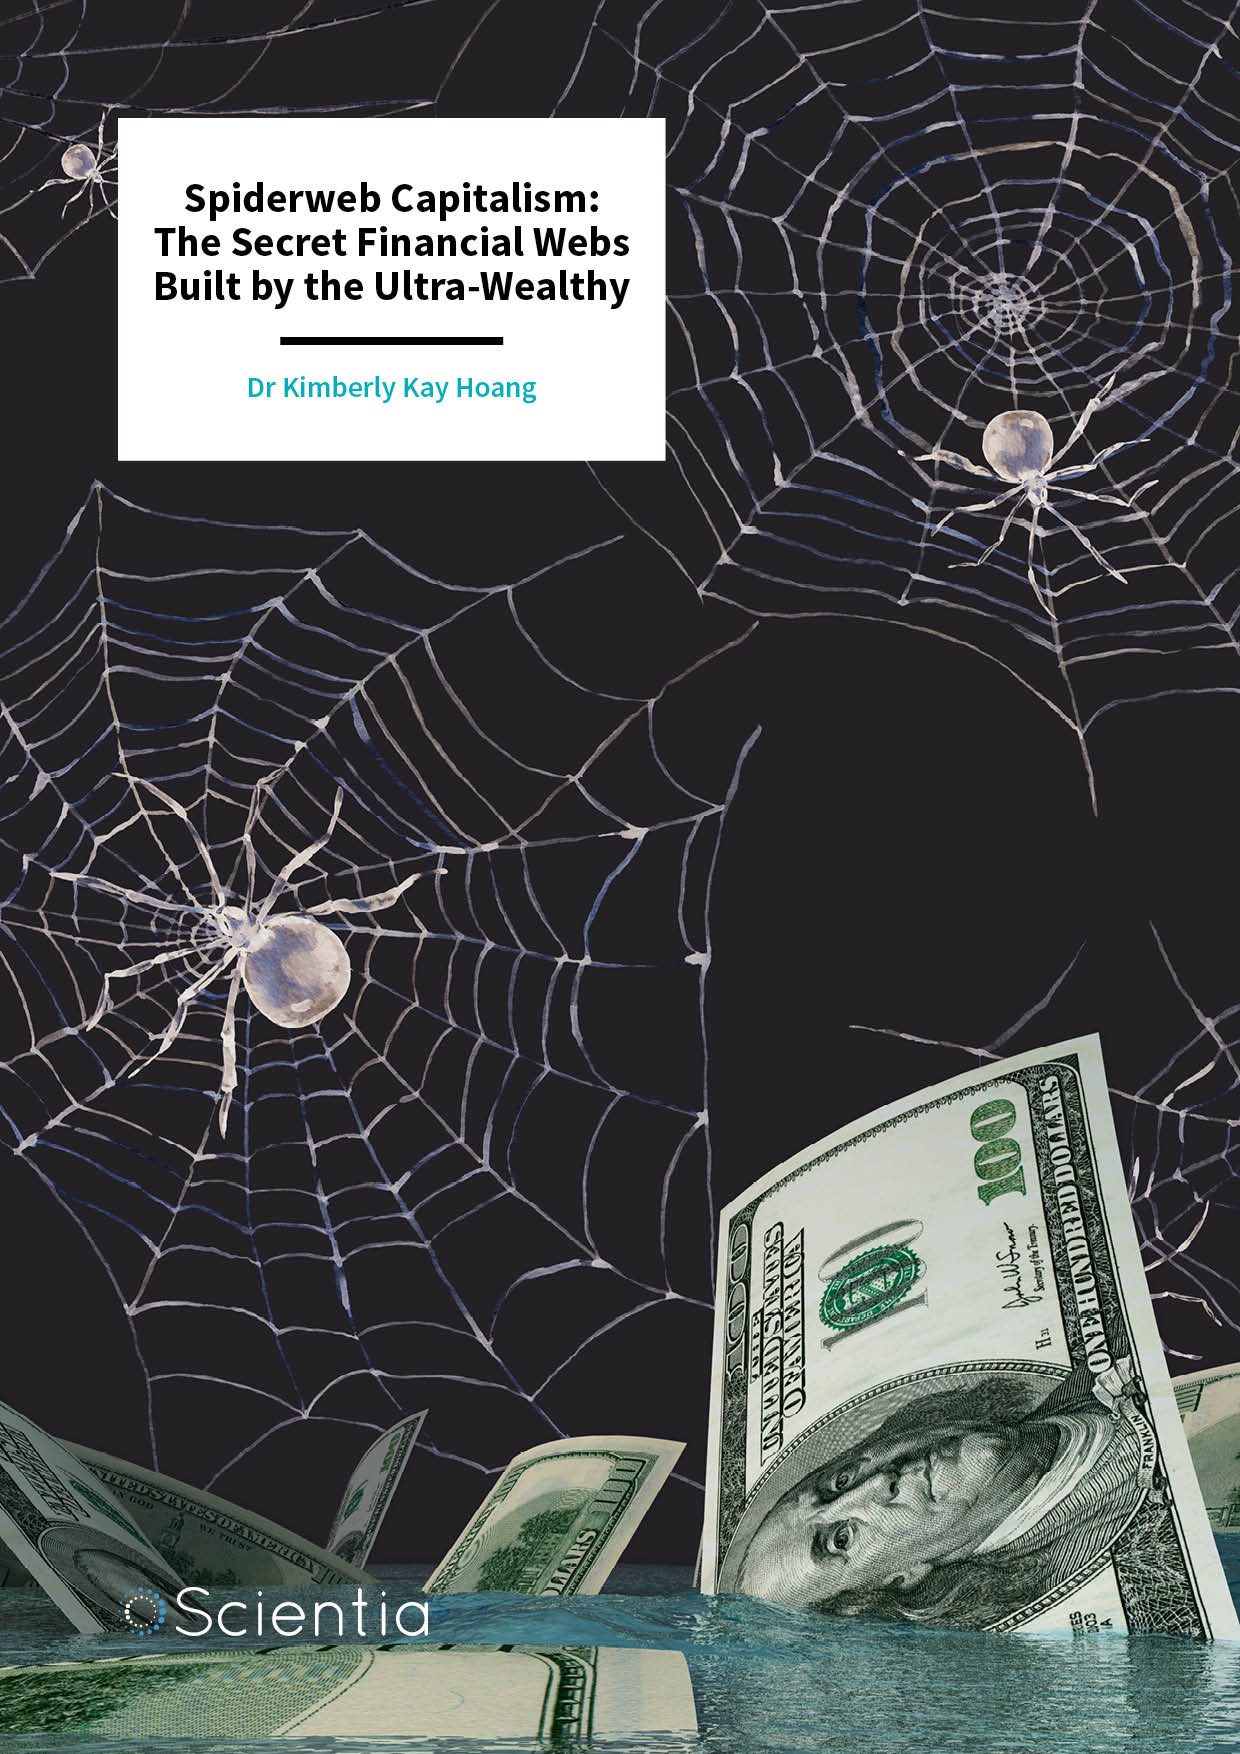 Dr Kimberly Kay Hoang | Spiderweb Capitalism: The Secret Financial Webs Built by the Ultra-Wealthy